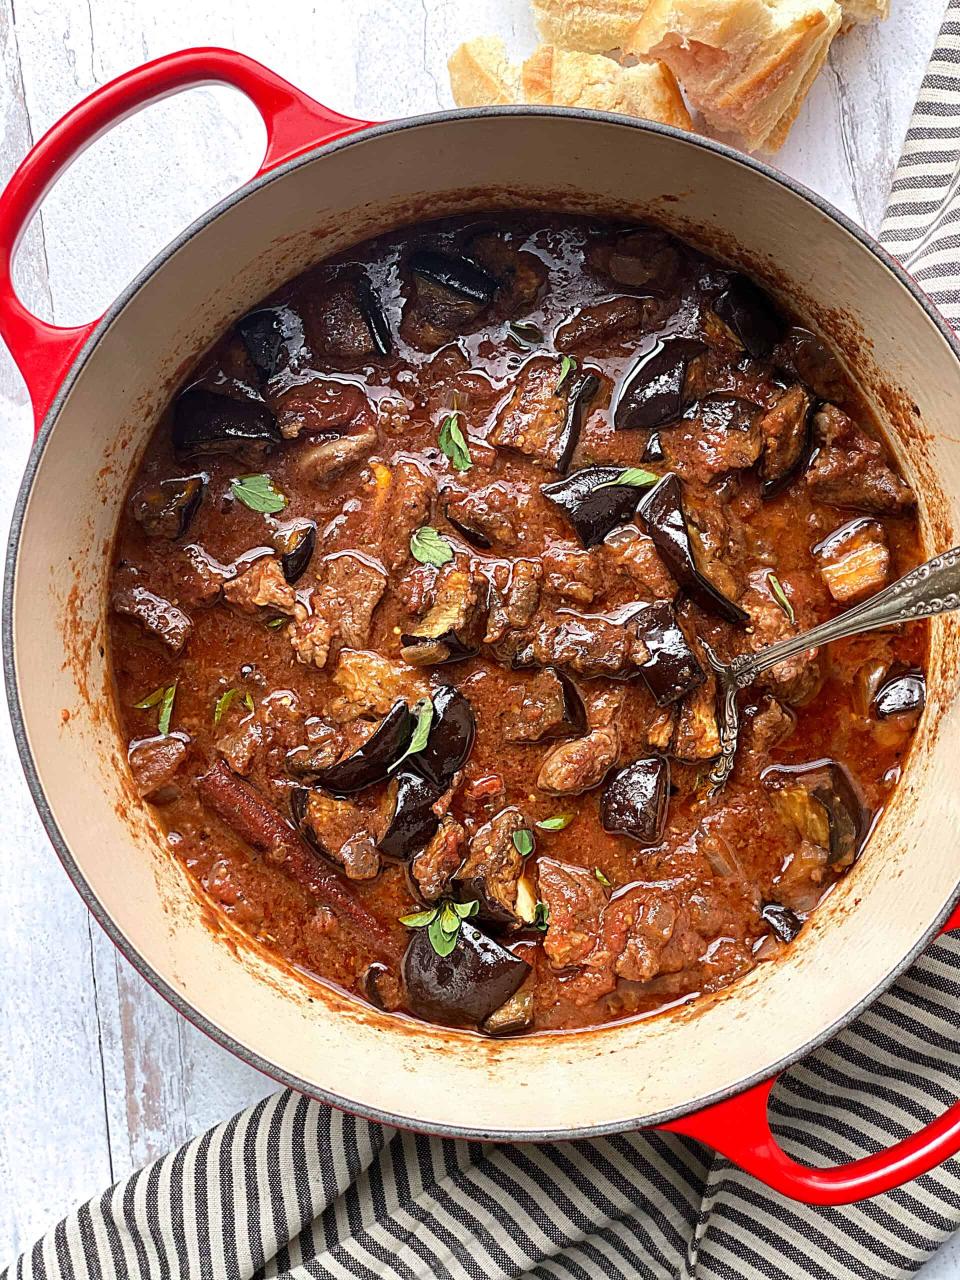 Old Fashioned Beef Stew With Eggplant - The Greek Foodie